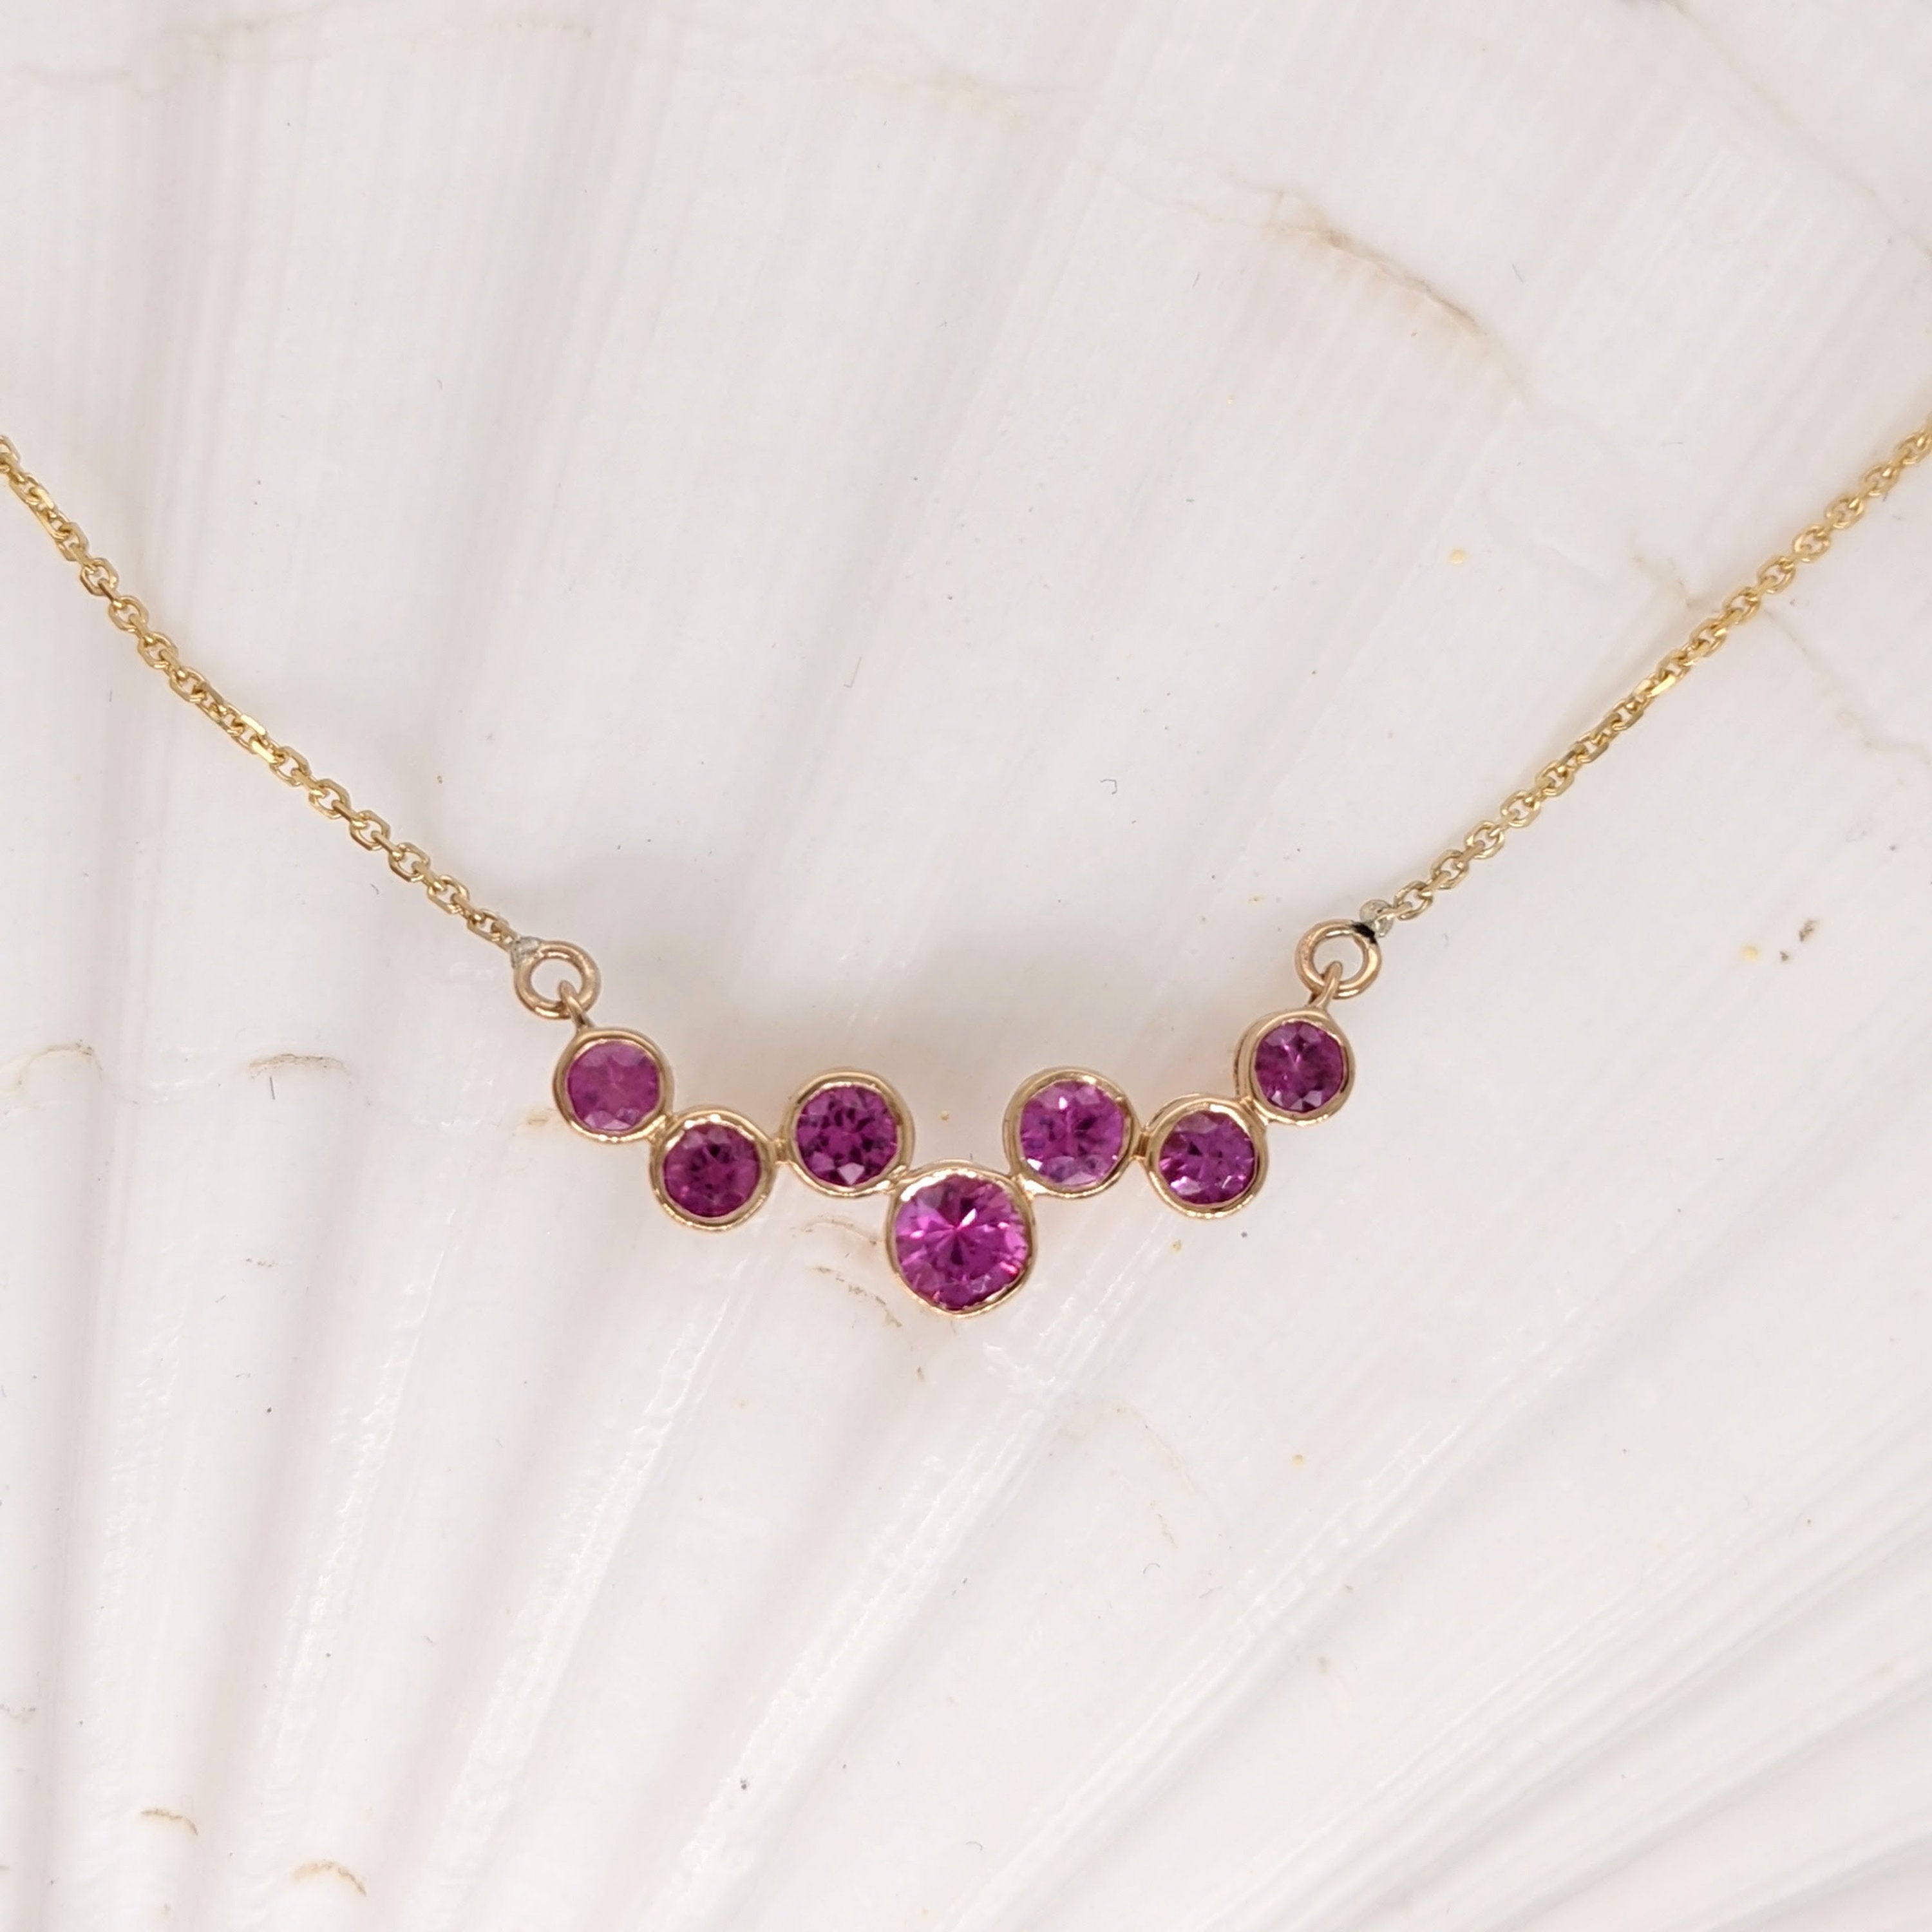 Natural Pink Sapphire Necklace in Solid 14k Yellow, White or Rose Gold | Gemstone Bubble Pendant | Attached Chain | September Birthstone